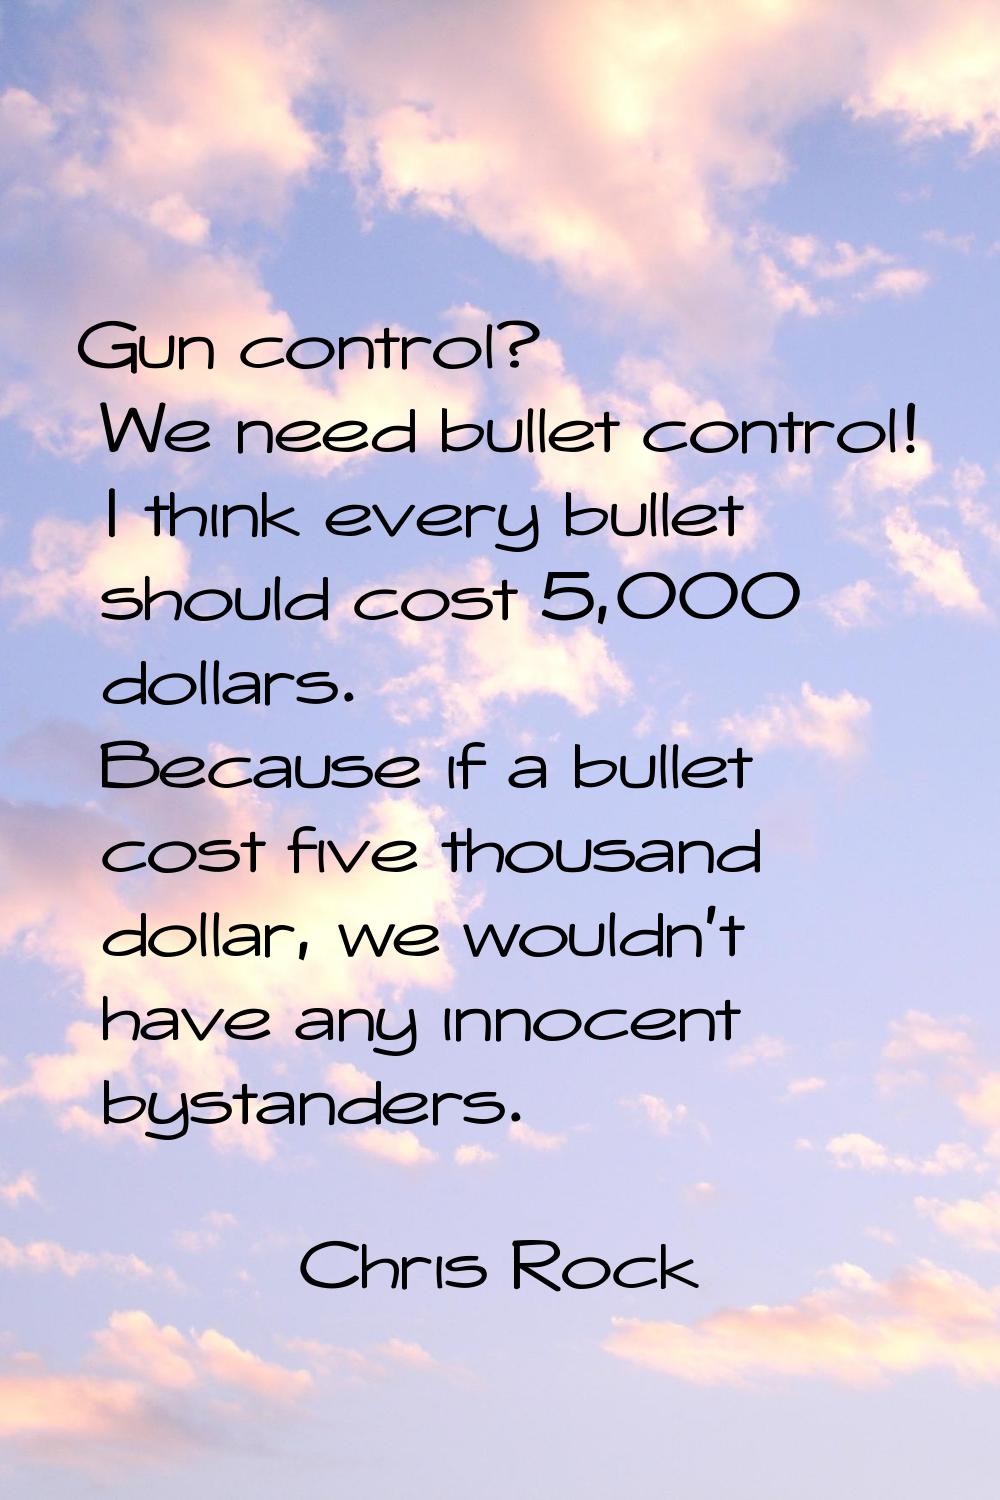 Gun control? We need bullet control! I think every bullet should cost 5,000 dollars. Because if a b